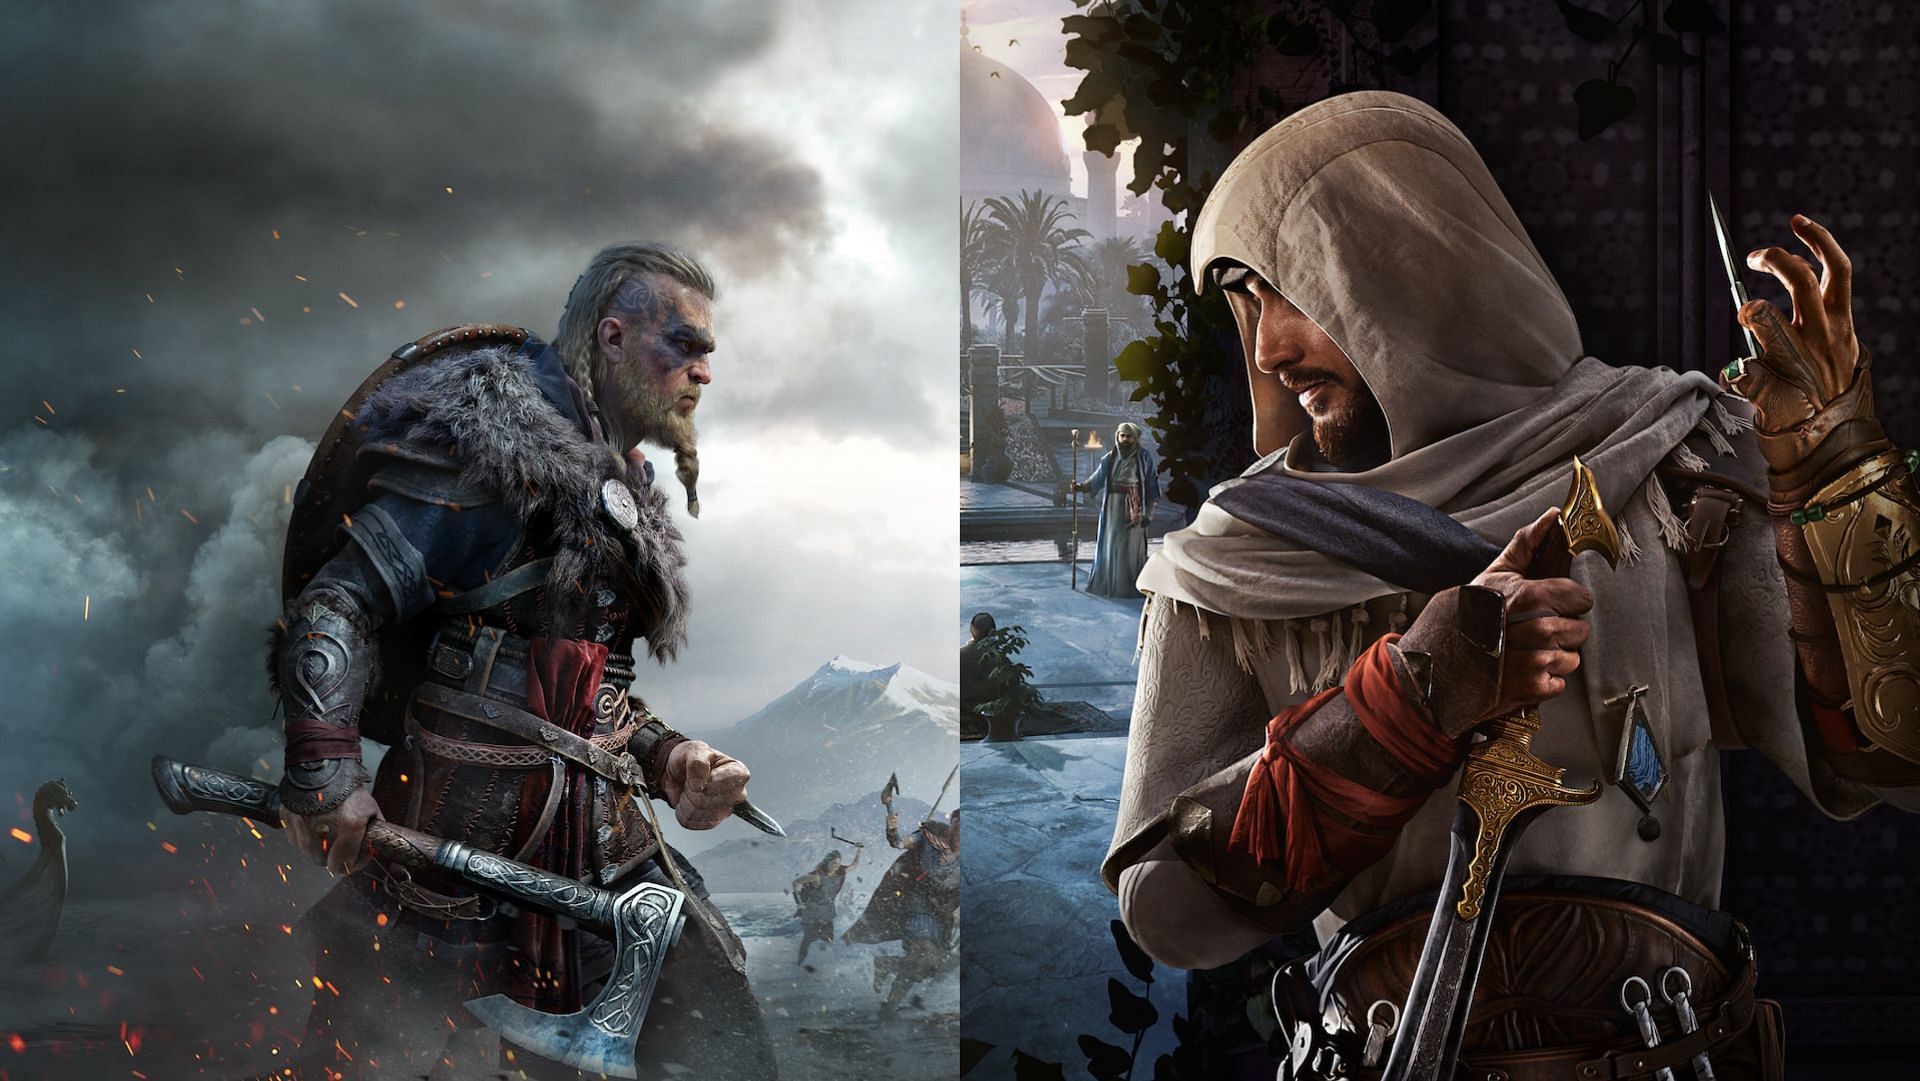 Assassin's Creed Valhalla beats Call of Duty in race for No.1